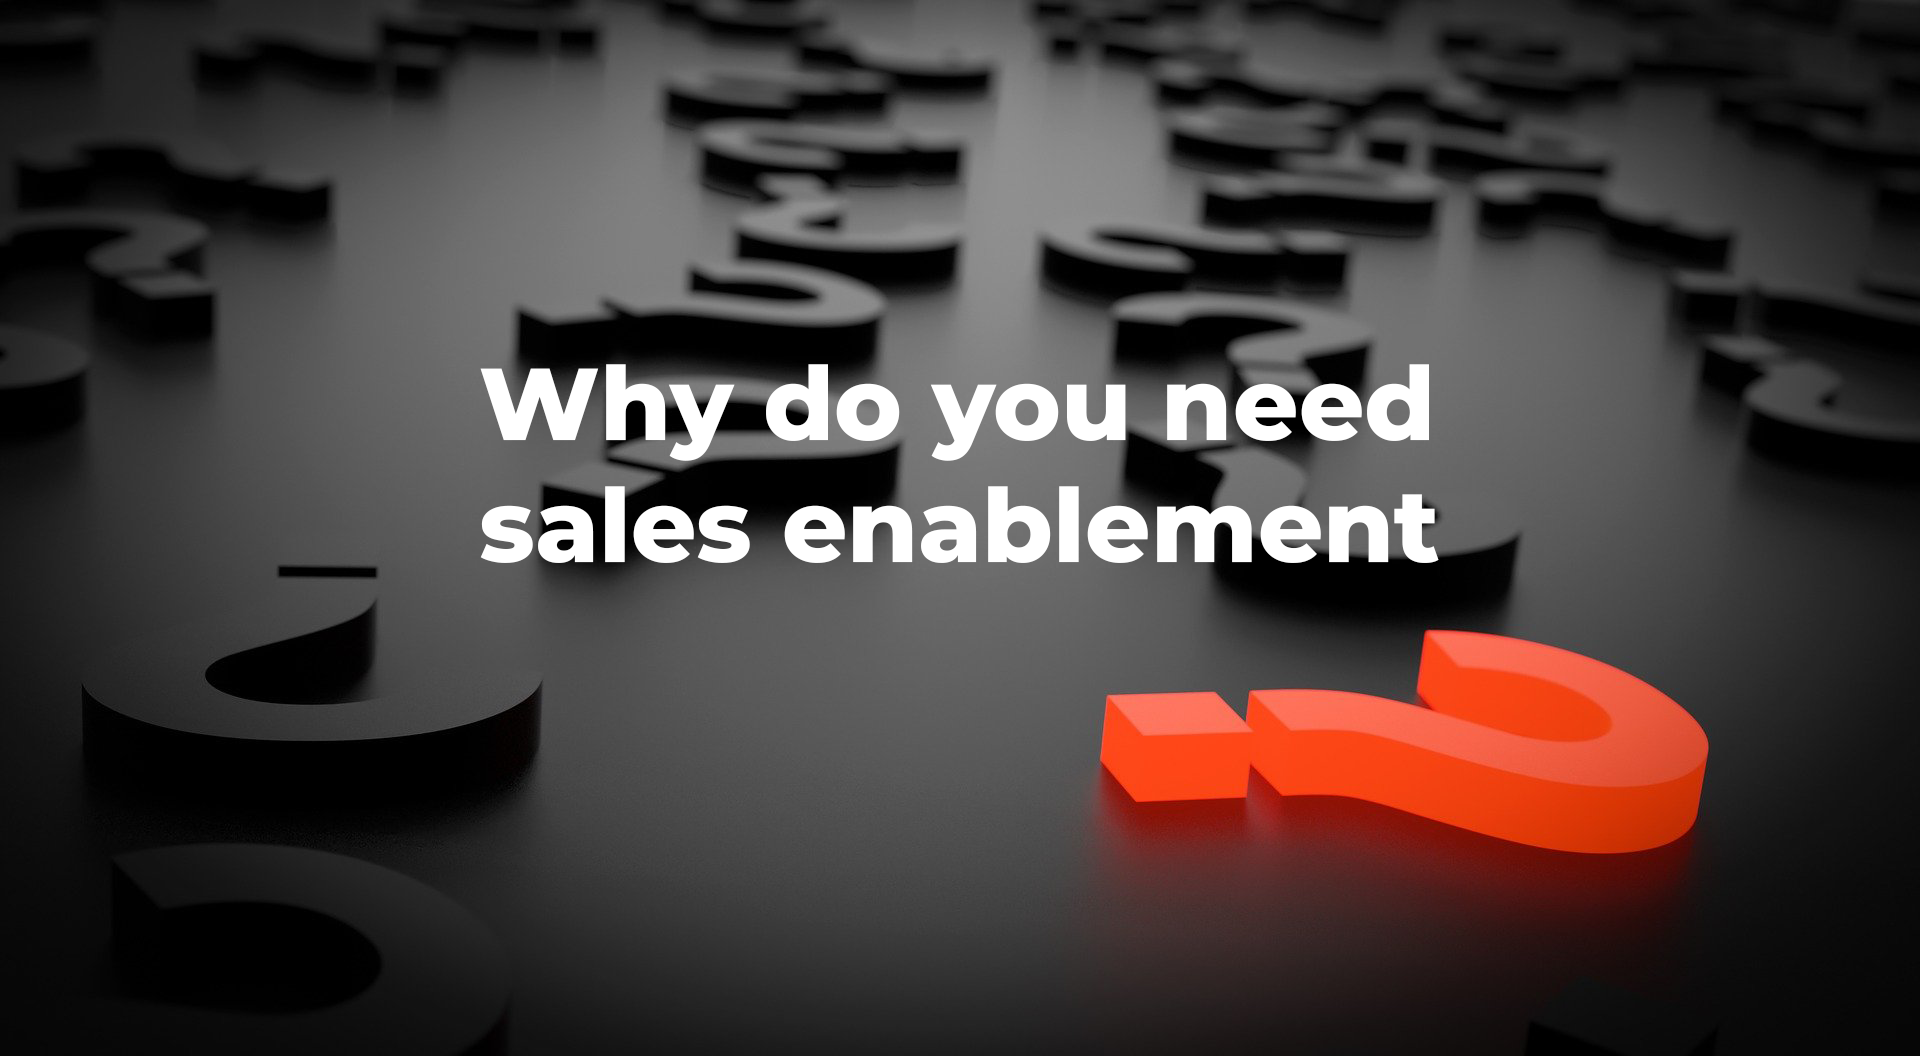 What is a sales enablement Charter and why do you need one?